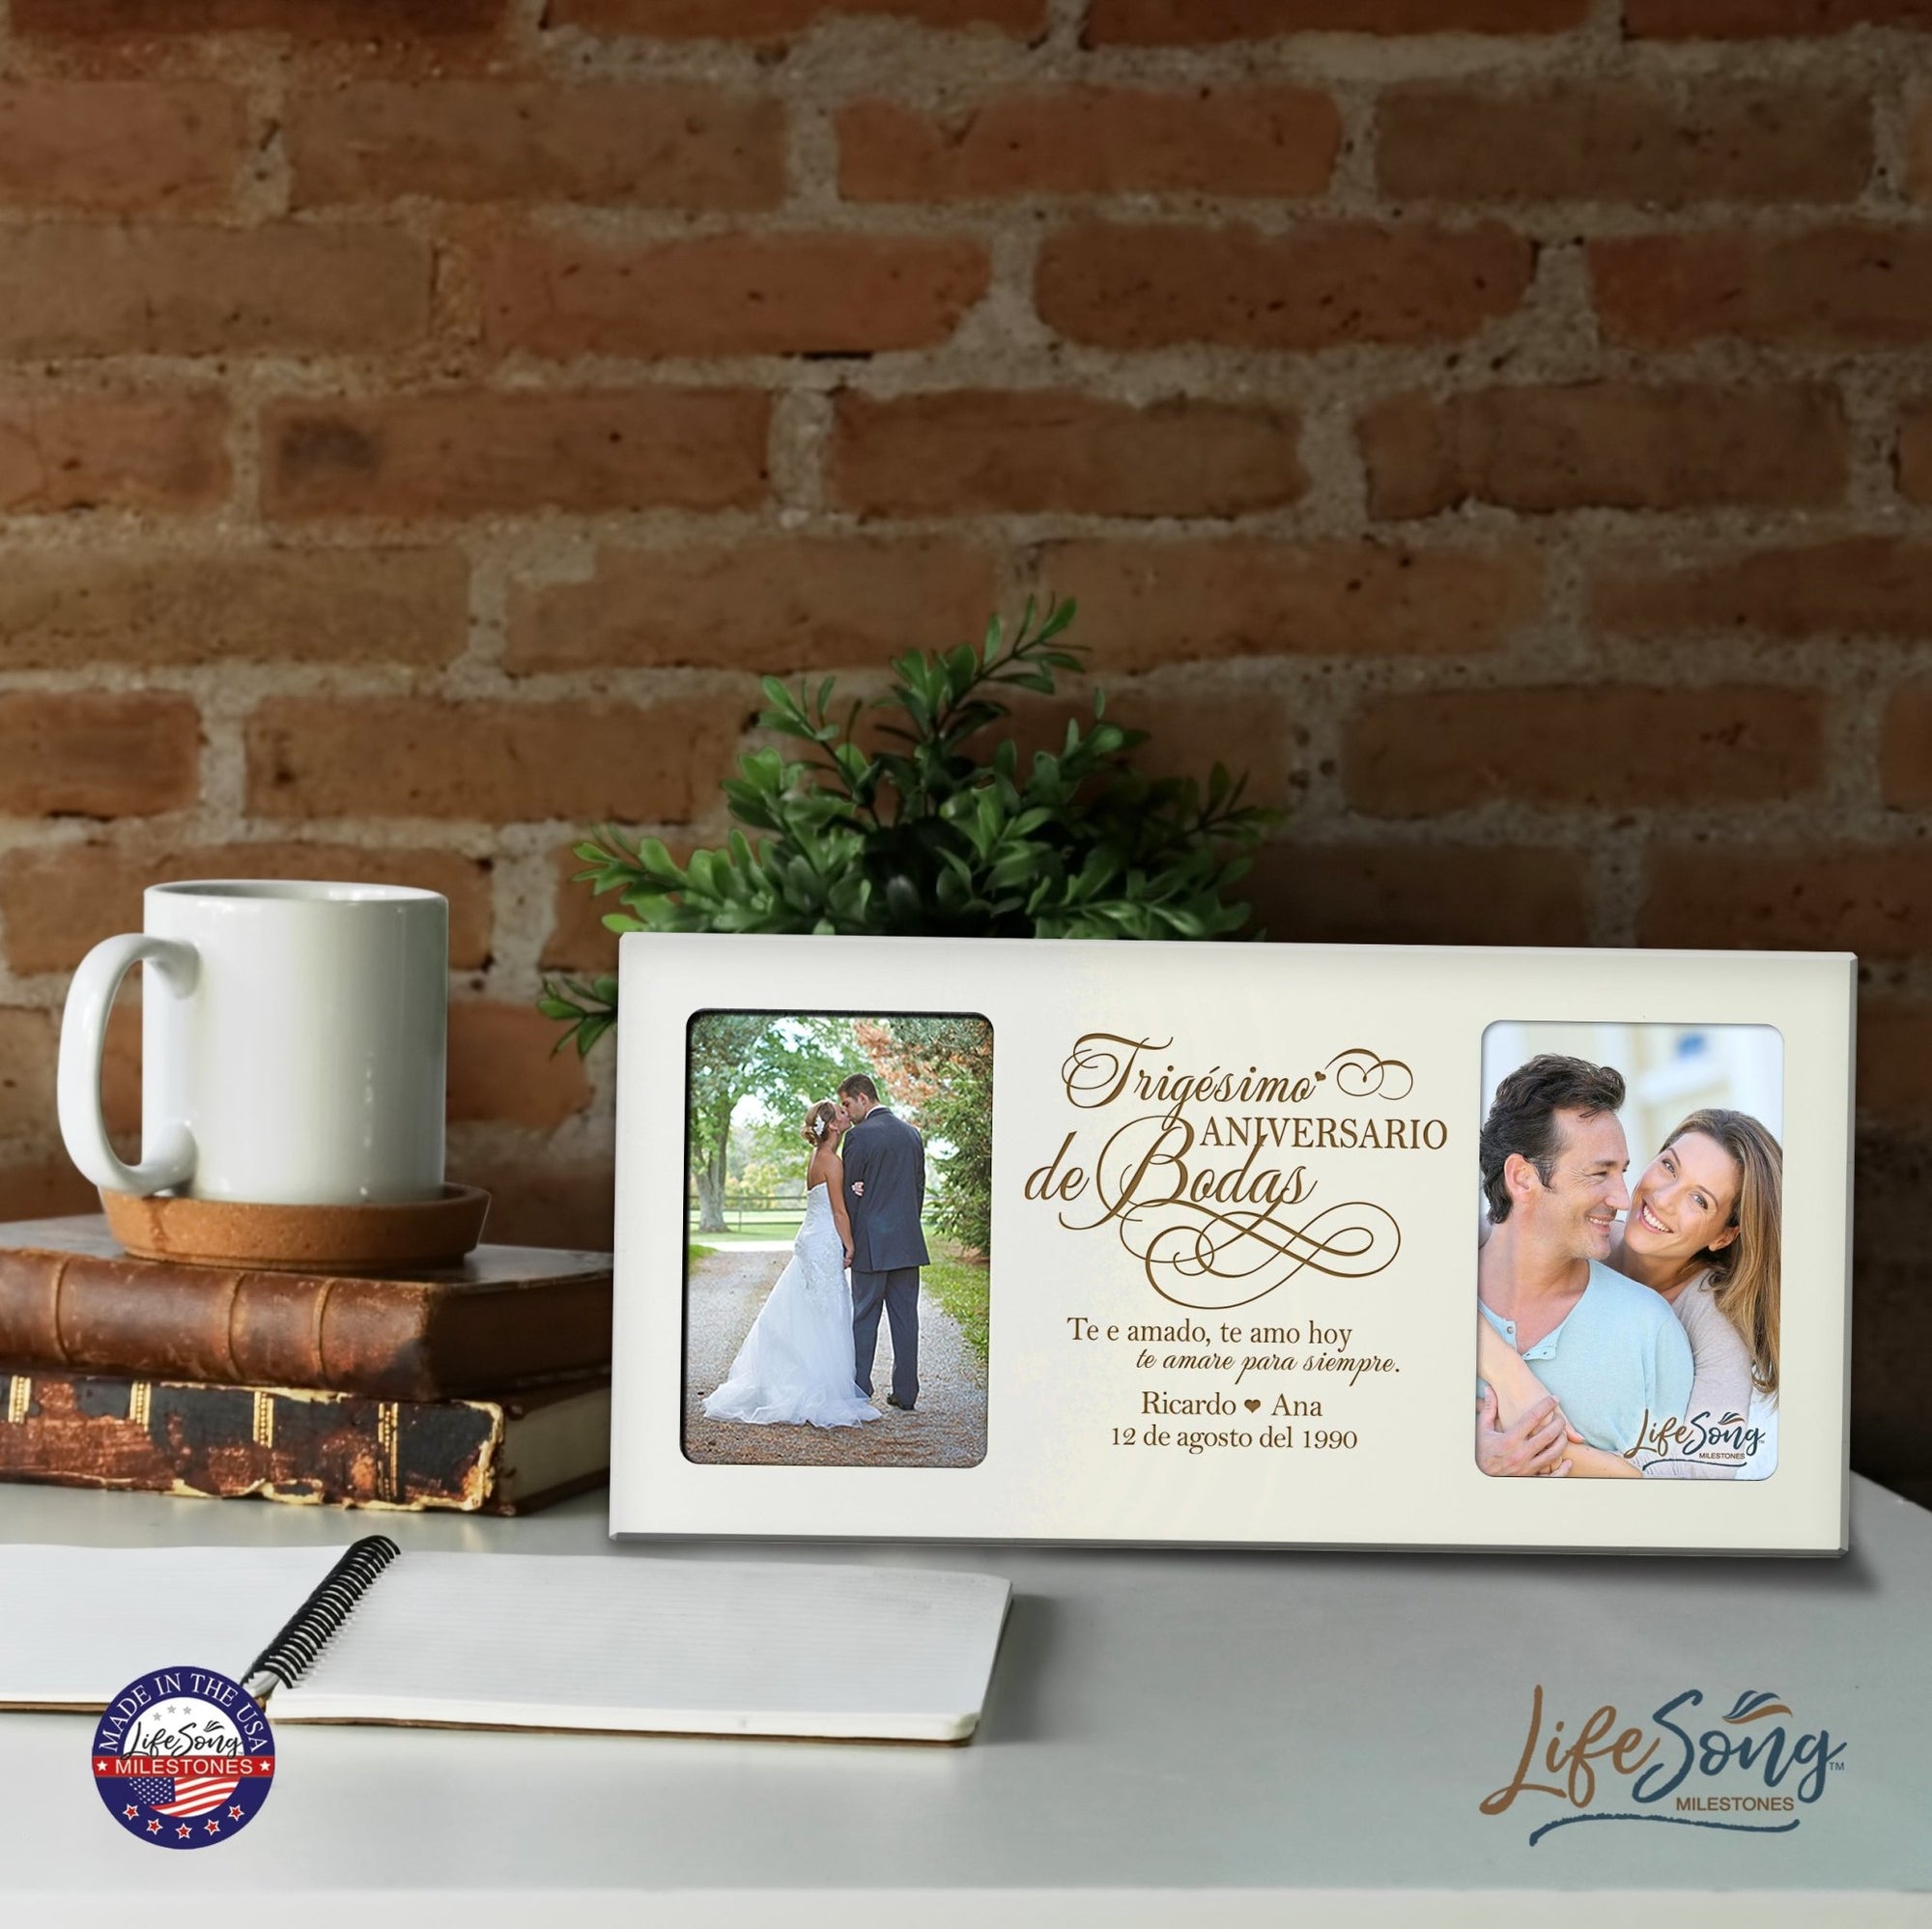 Lifesong Milestones Personalized Couples 30th Wedding Anniversary Spanish Picture Frame Home Decor